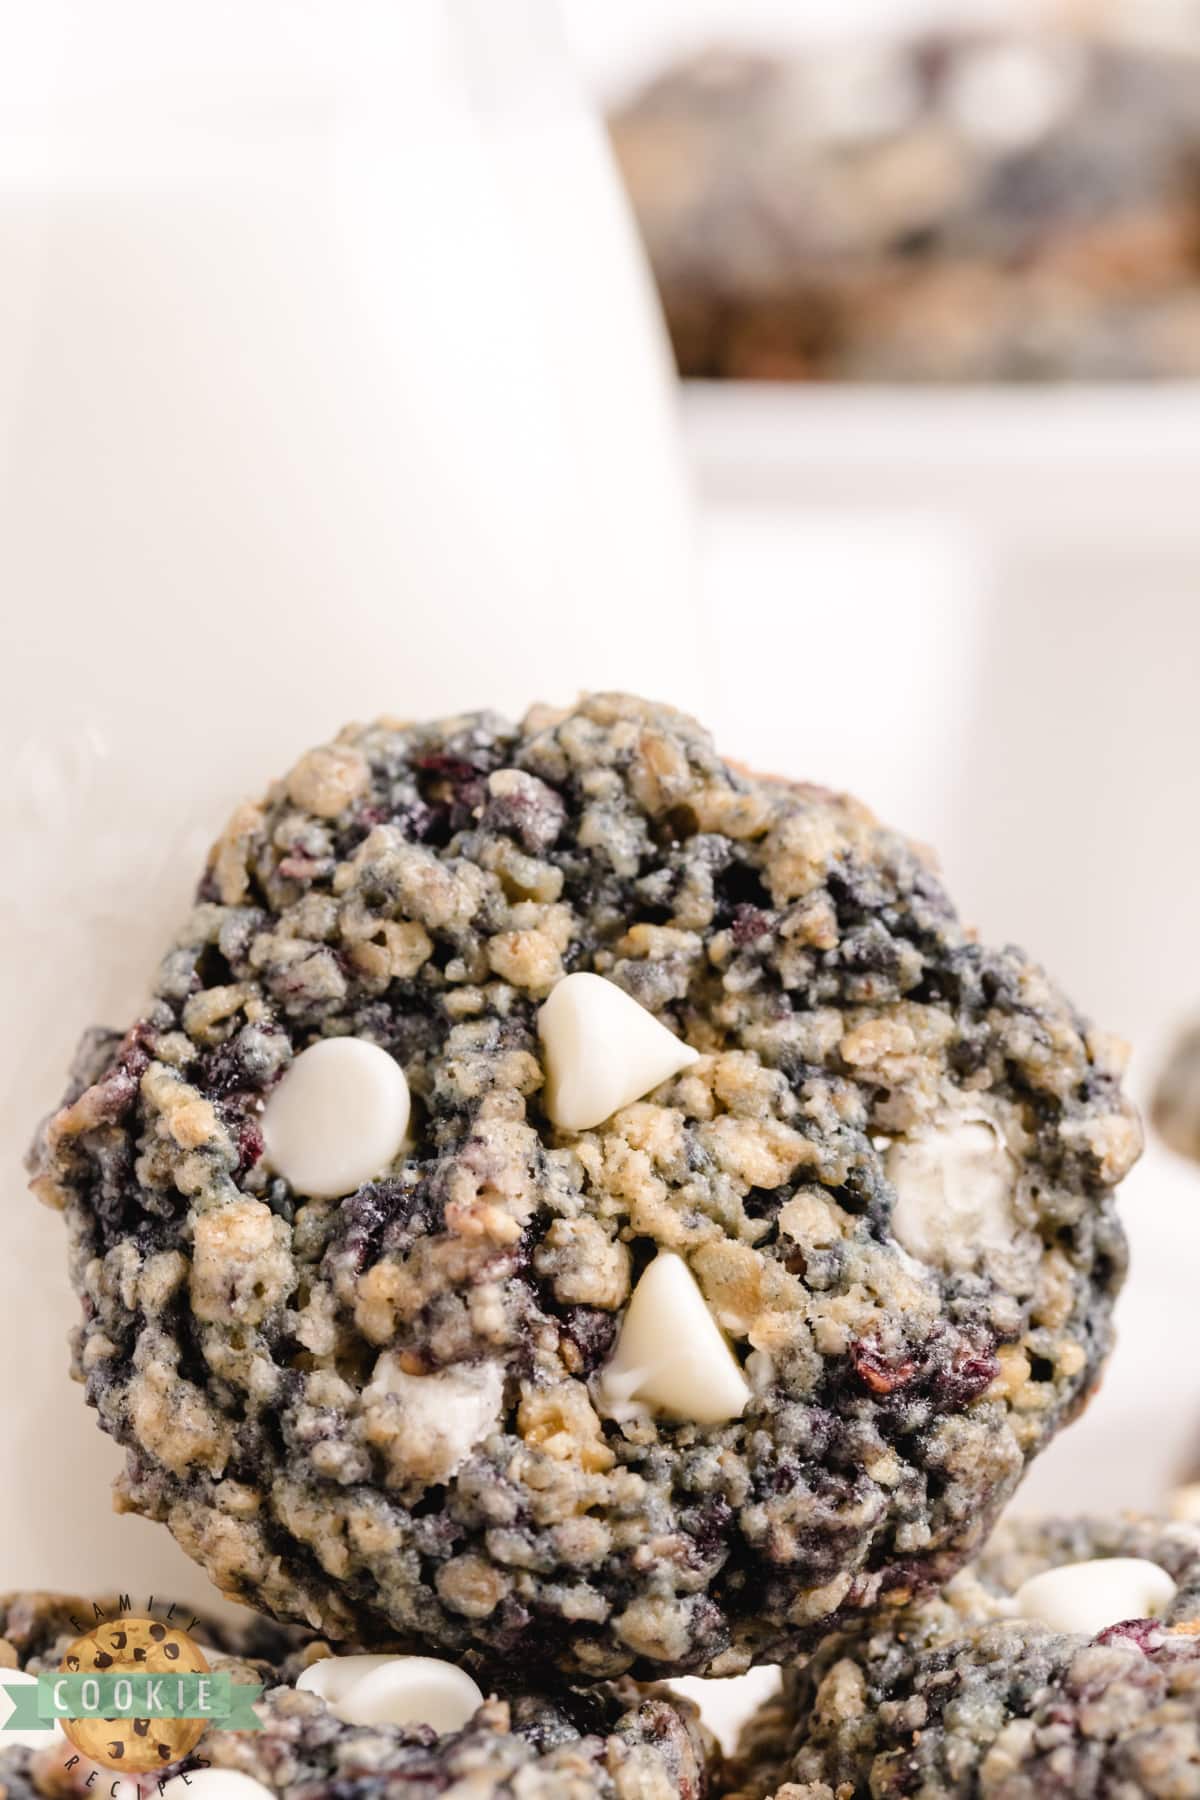 Oatmeal cookie recipe with white chocolate chips and fresh blackberries